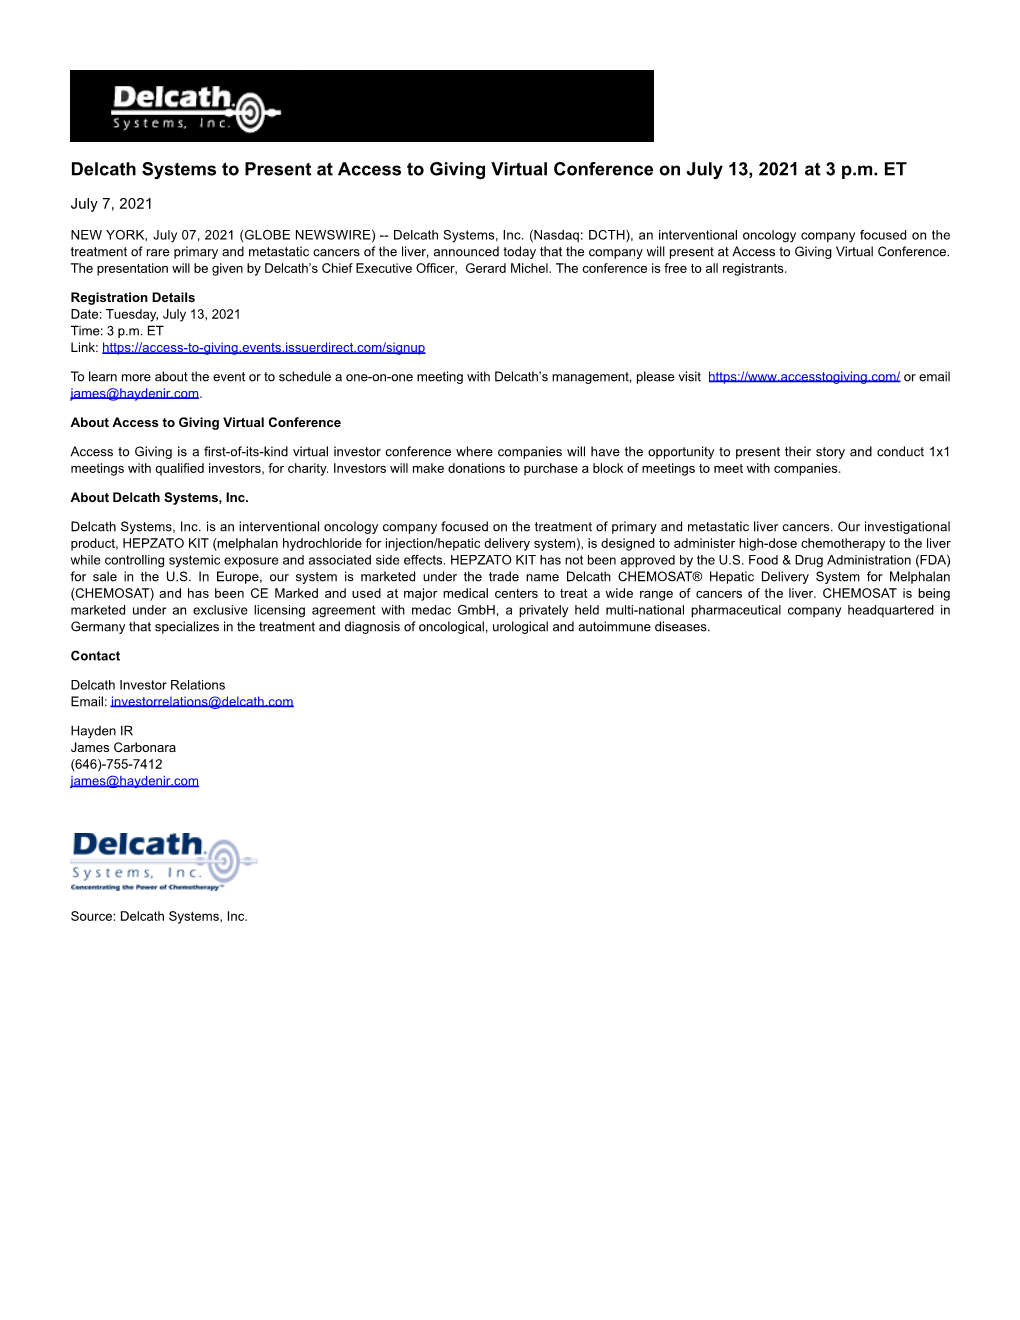 Delcath Systems to Present at Access to Giving Virtual Conference on July 13, 2021 at 3 P.M